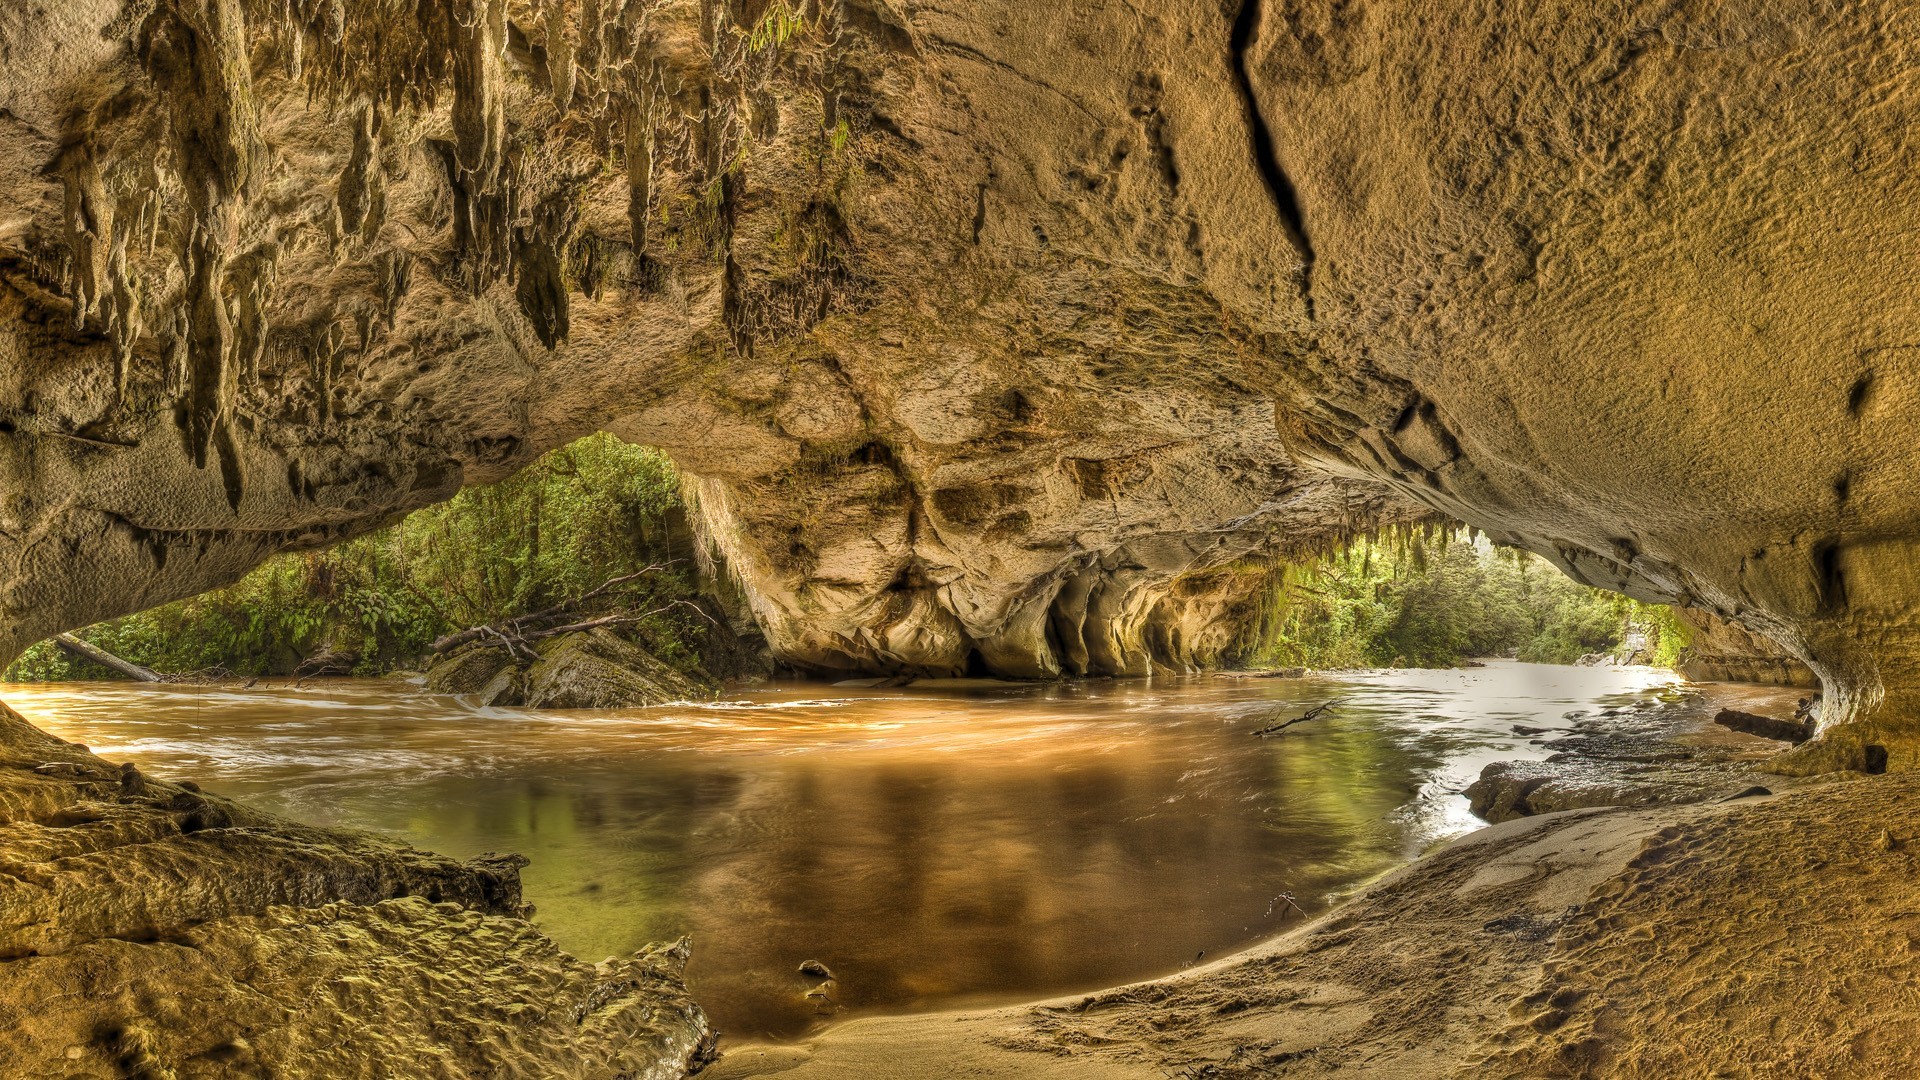 General 1920x1080 landscape river HDR cave nature outdoors